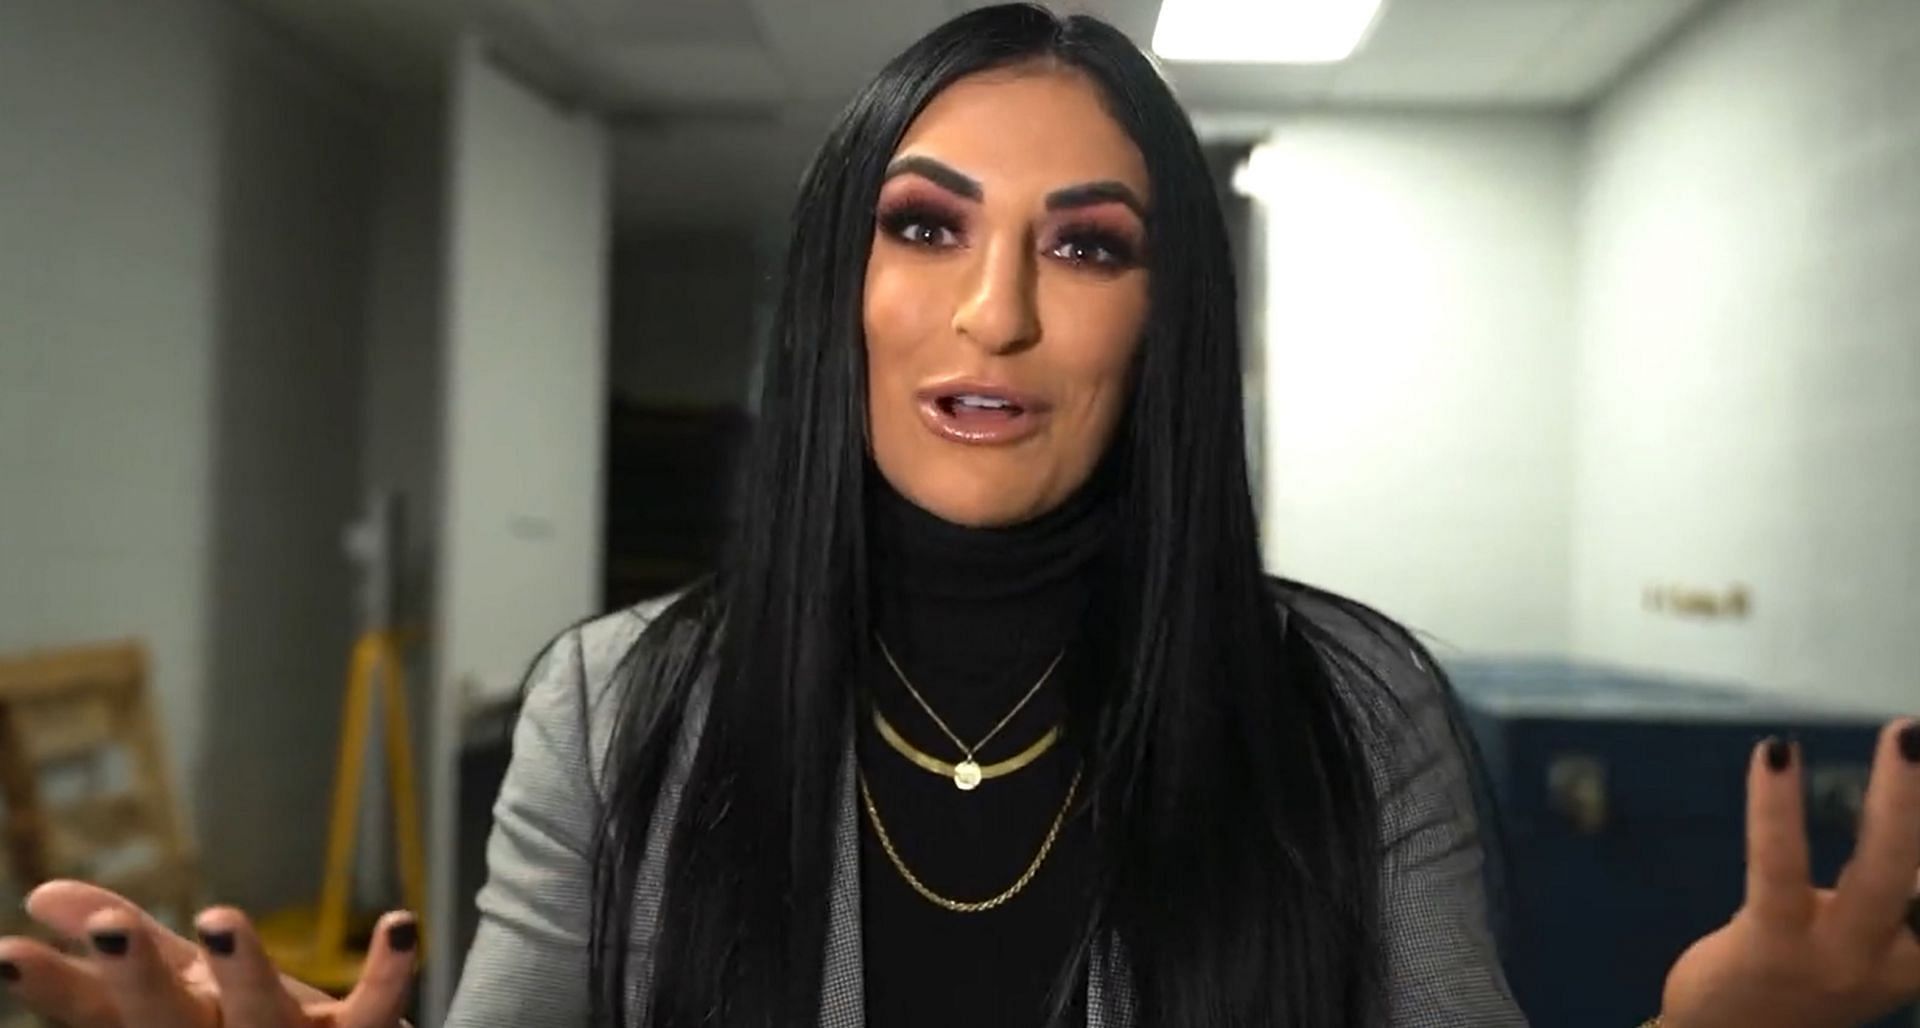 Sonya Deville and Naomi have a deep-seated animosity for each other